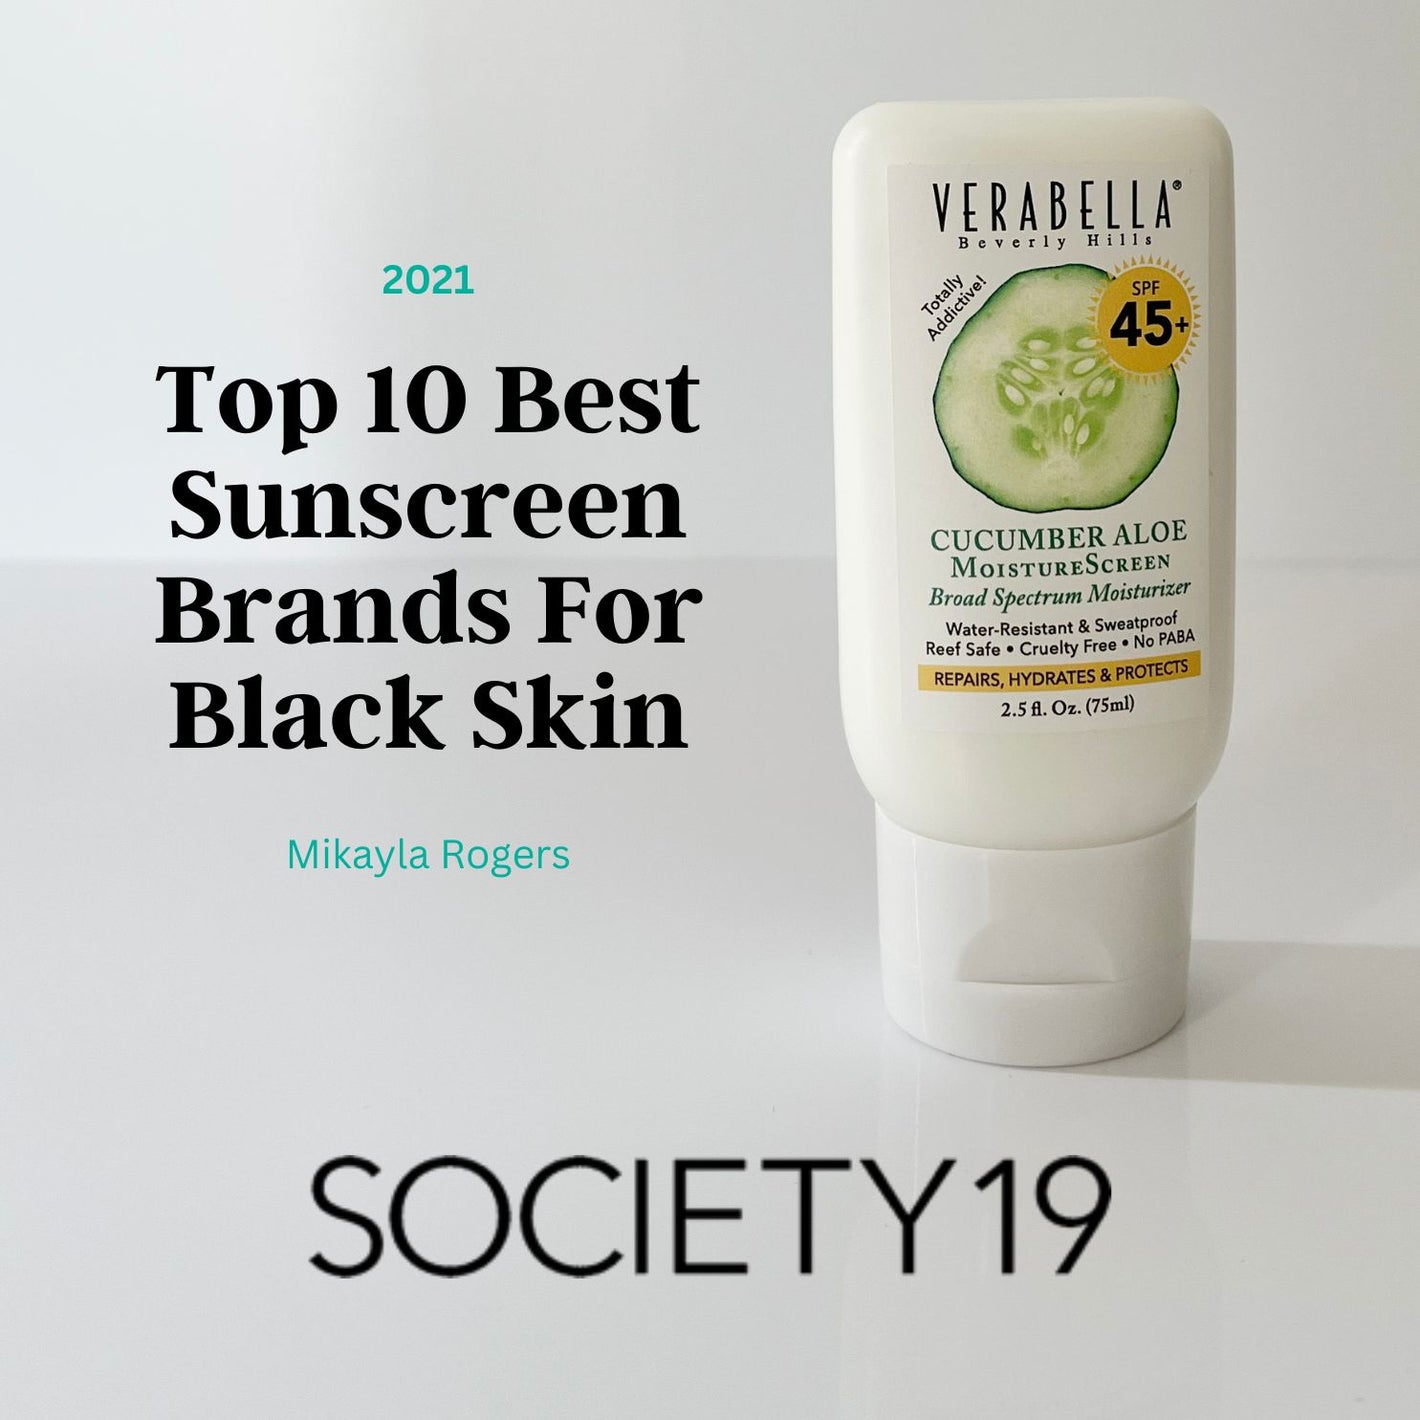 Society 19 - Verabella in Top 10 Best Sunscreen Brands for Black Skin, further details provided below